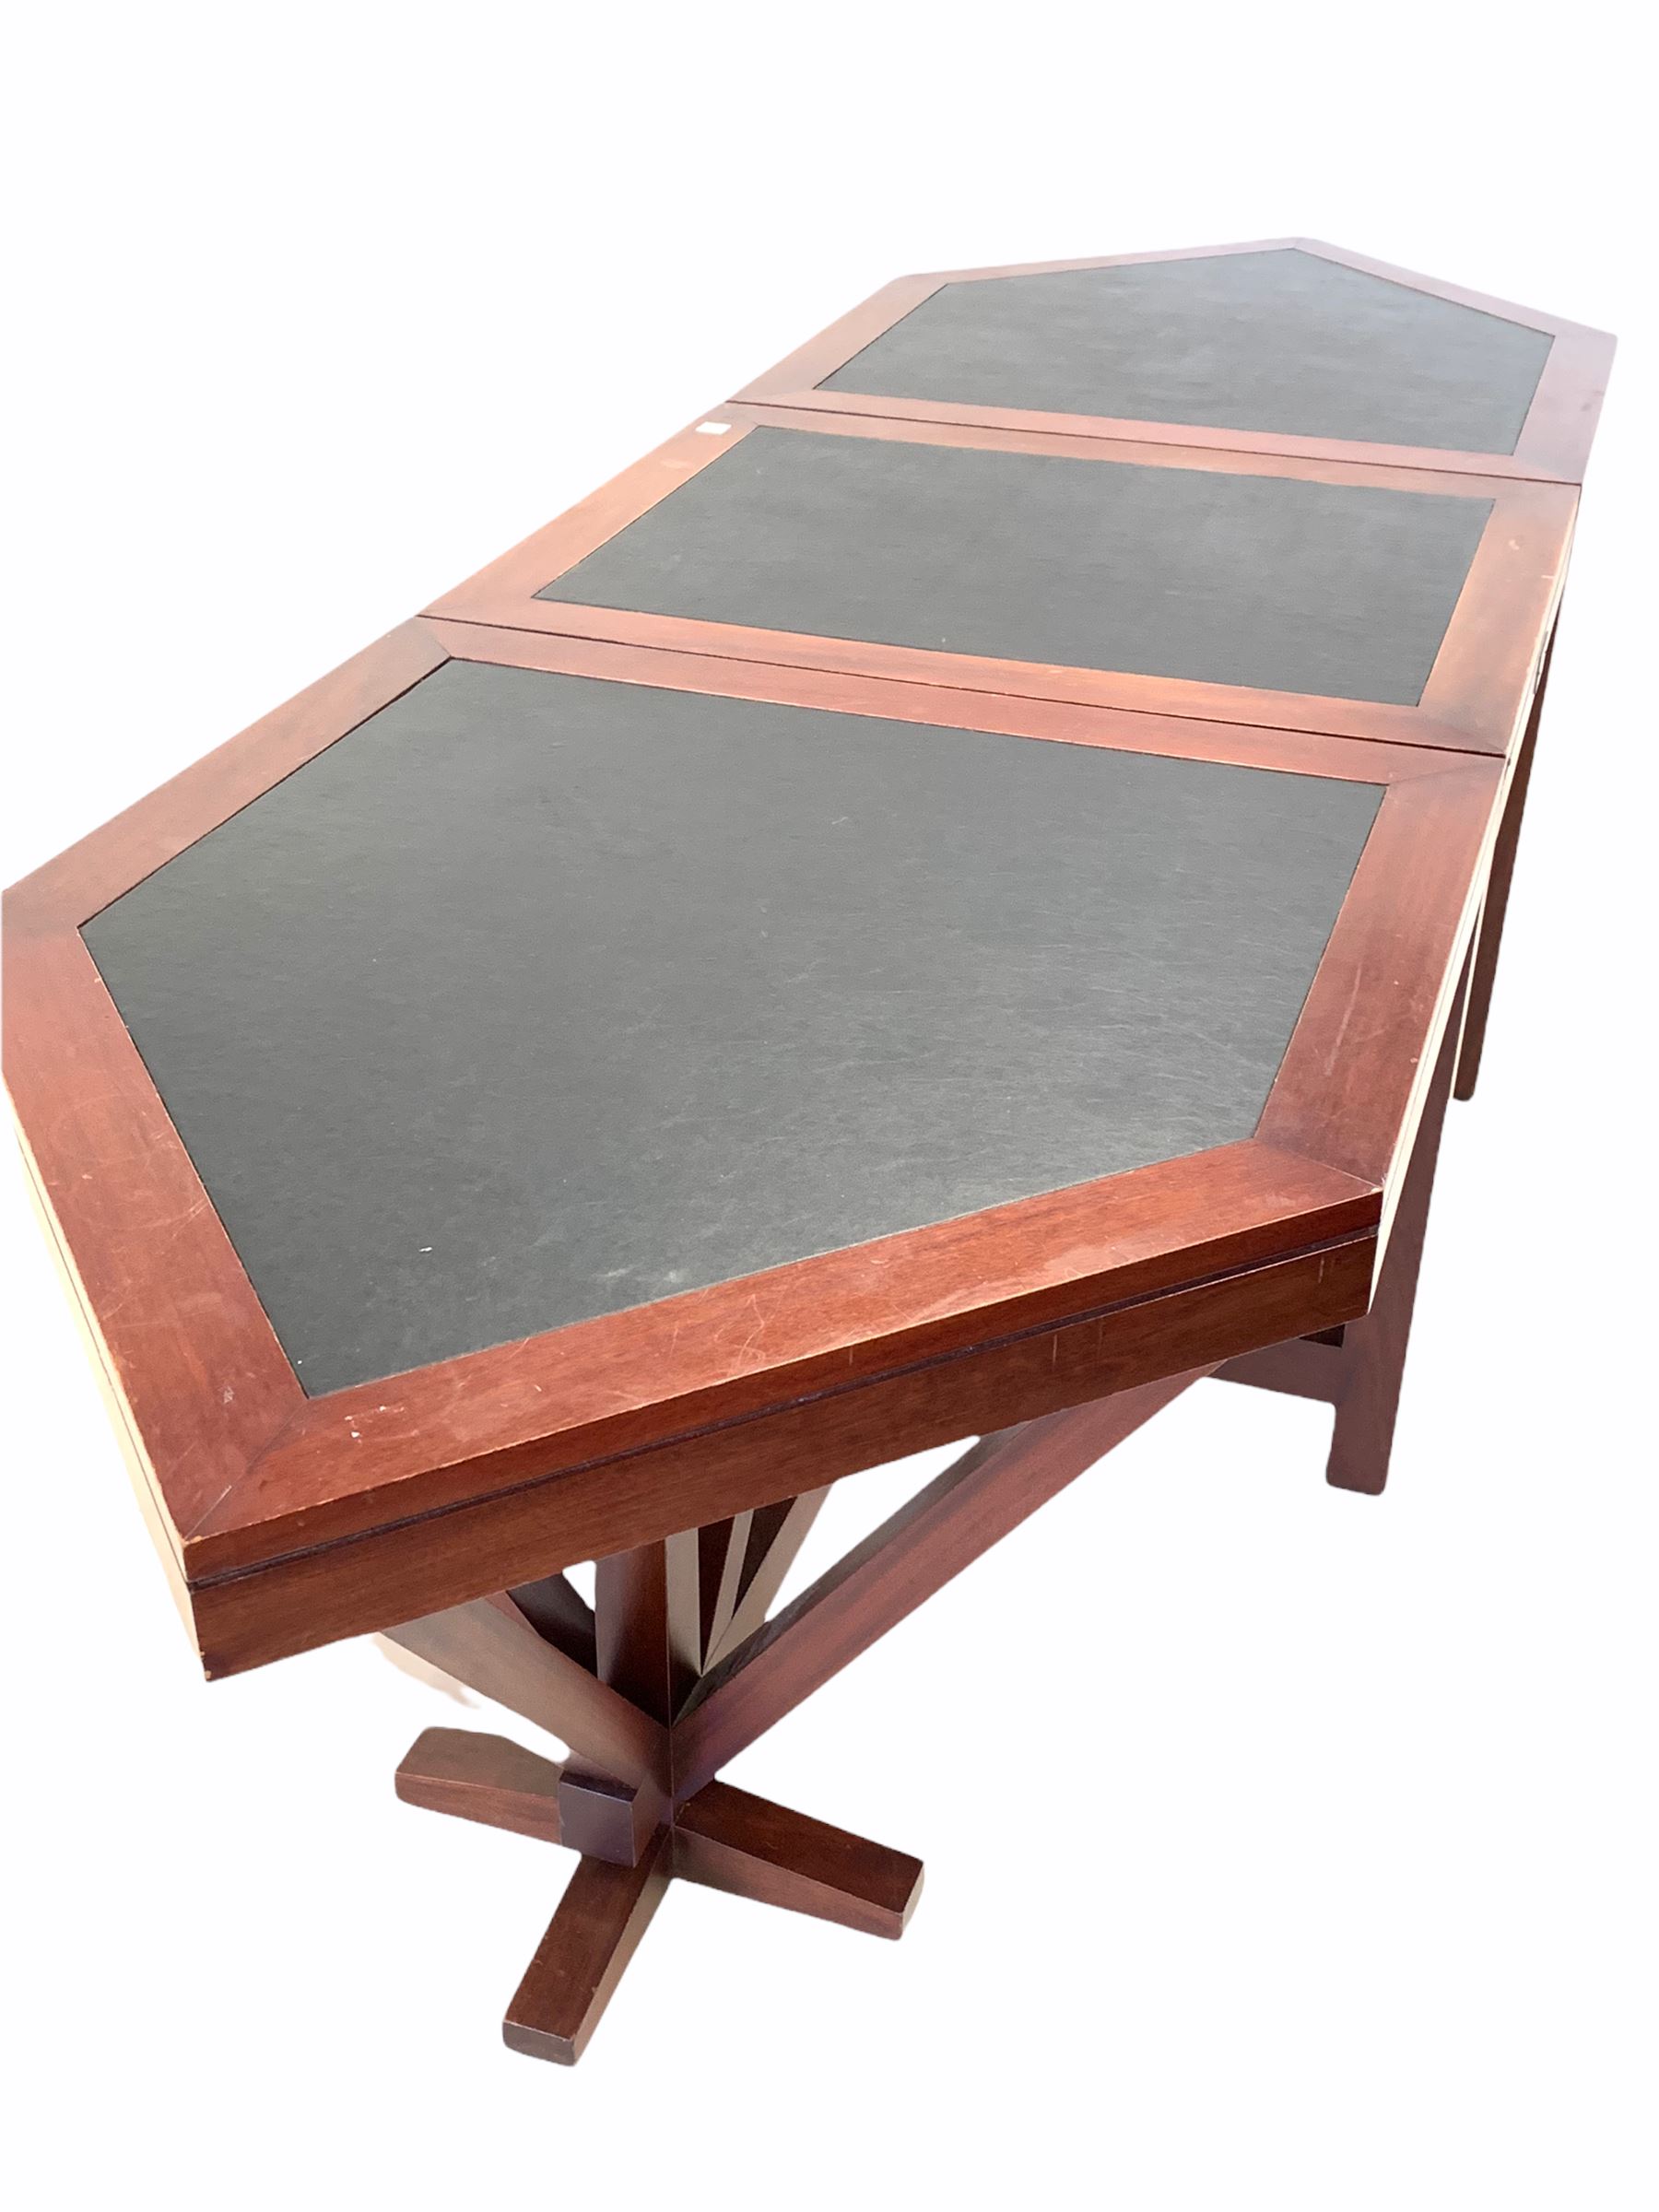 20th century hardwood sectional boardroom table - Image 2 of 3